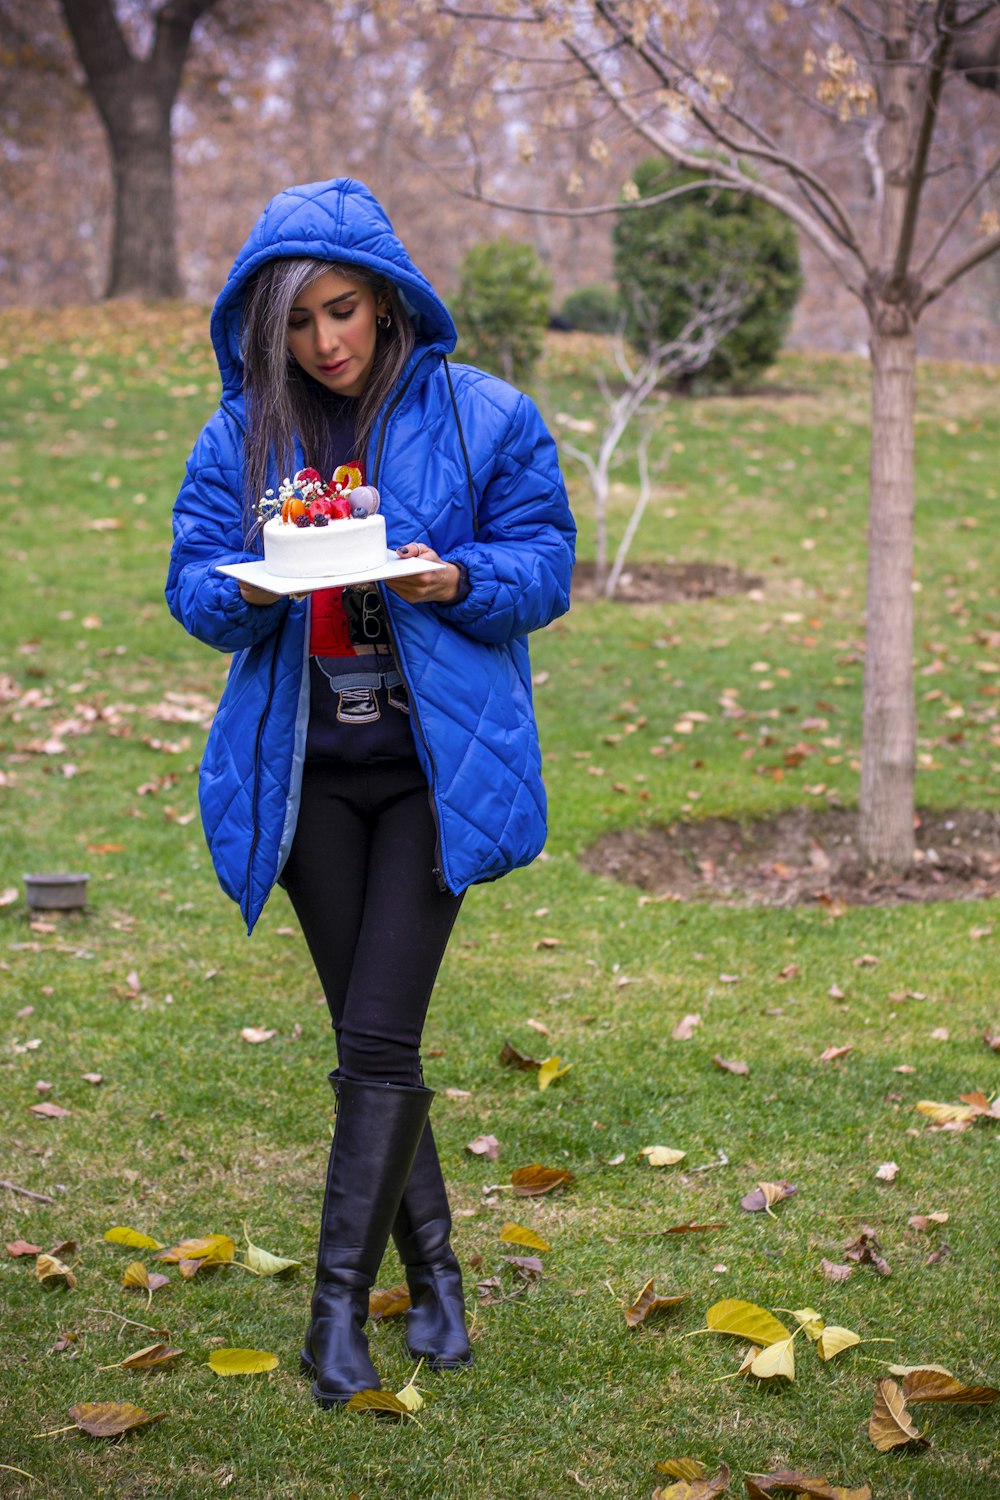 a woman in a blue jacket carrying a cake